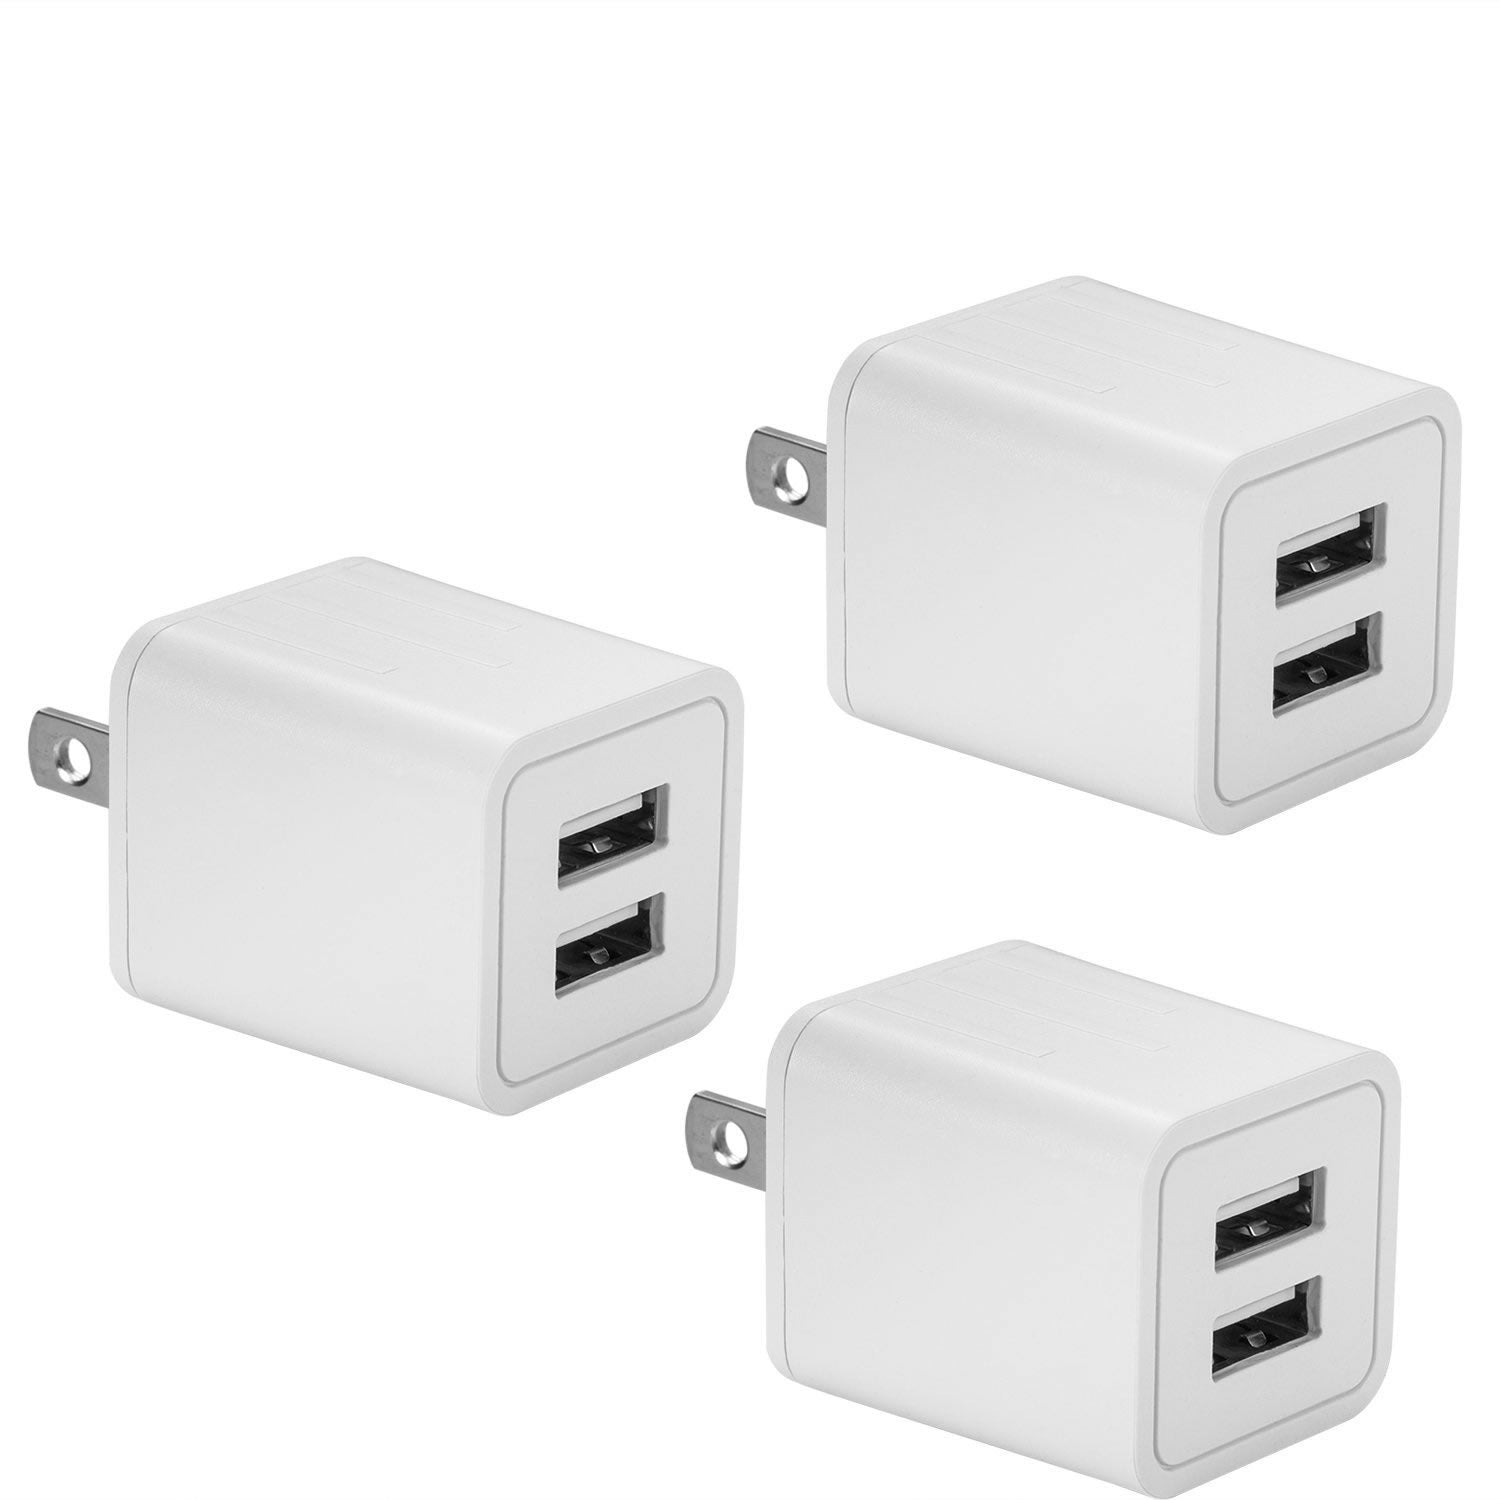 70-5105-02 Universal USB Wall Charger/Travel Charger Dual Port  with Quick Charger 3.0 / 2.0